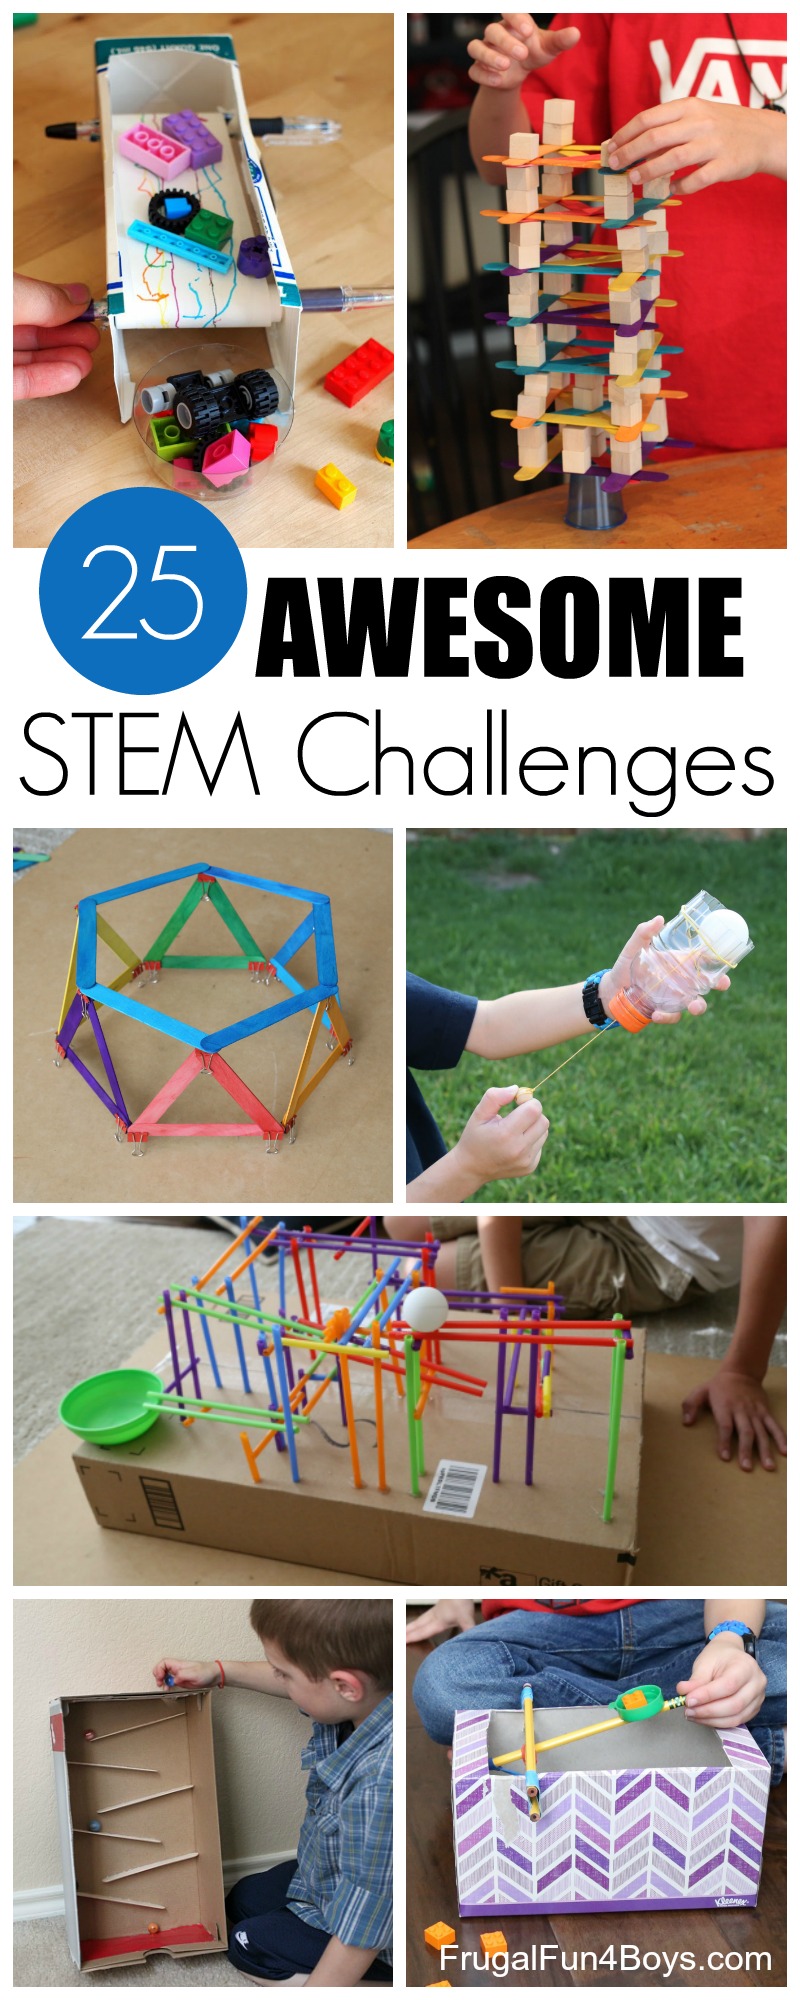 25 Awesome STEM Challenges for Kids (with Inexpensive or Recycled Materials!) - Frugal Fun For Boys and Girls